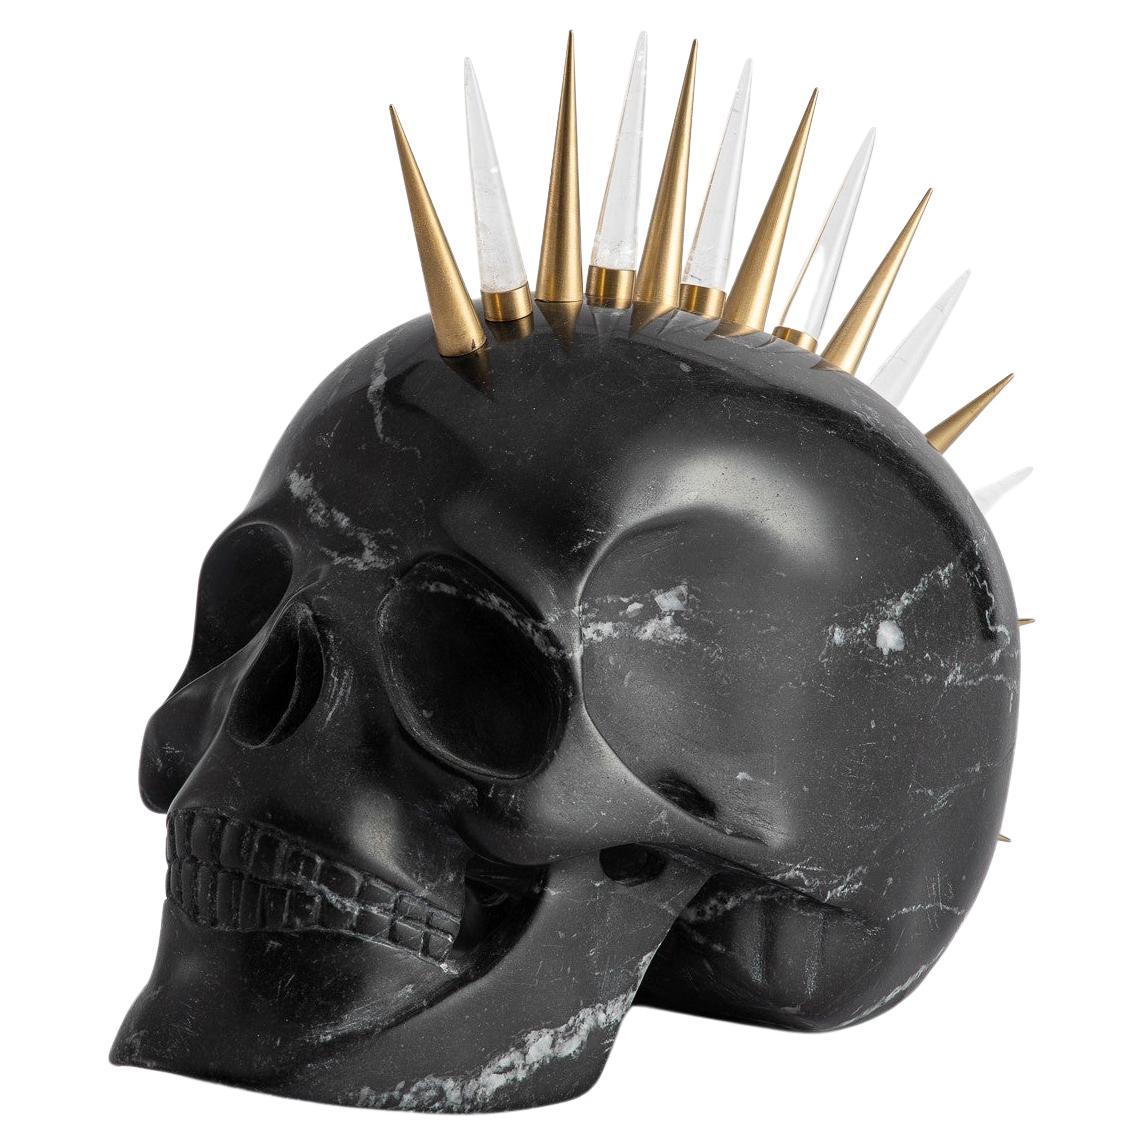 Engage your senses with this remarkable, carved Nero Marquina marble skull, a provocative work of art that revels in its audacious form. More than an artifact of the macabre, it is a stirring exploration of contrasting aesthetics and materials that